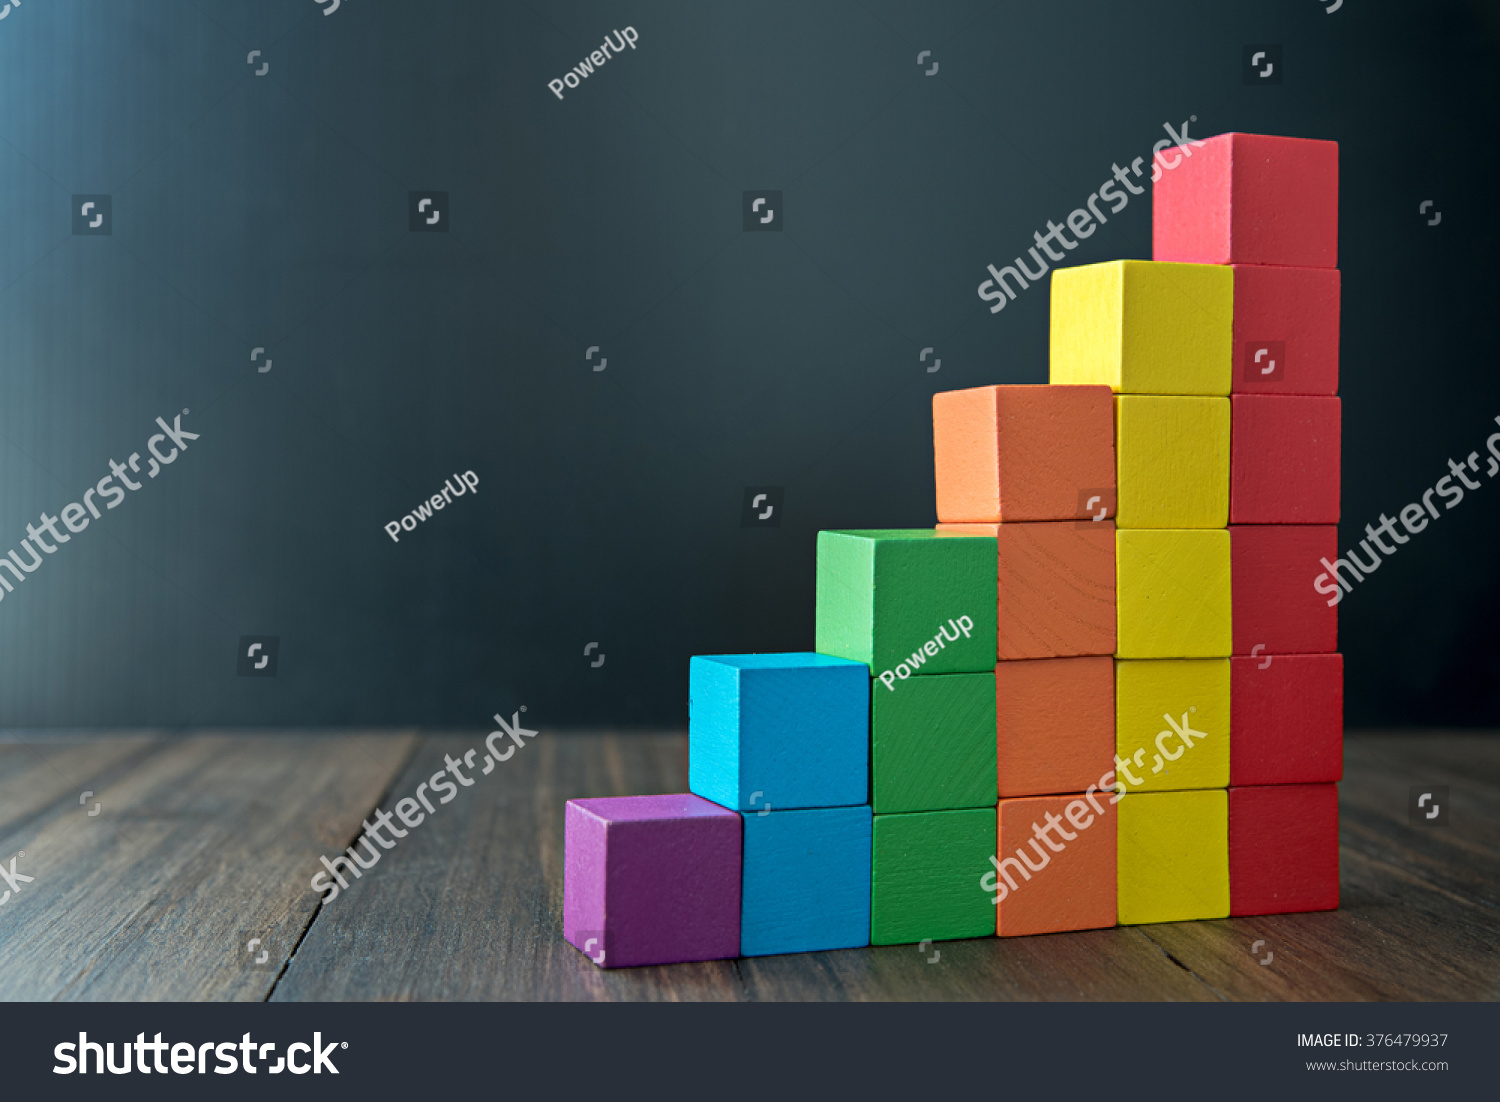 Colorful stack of wood cube building blocks #376479937